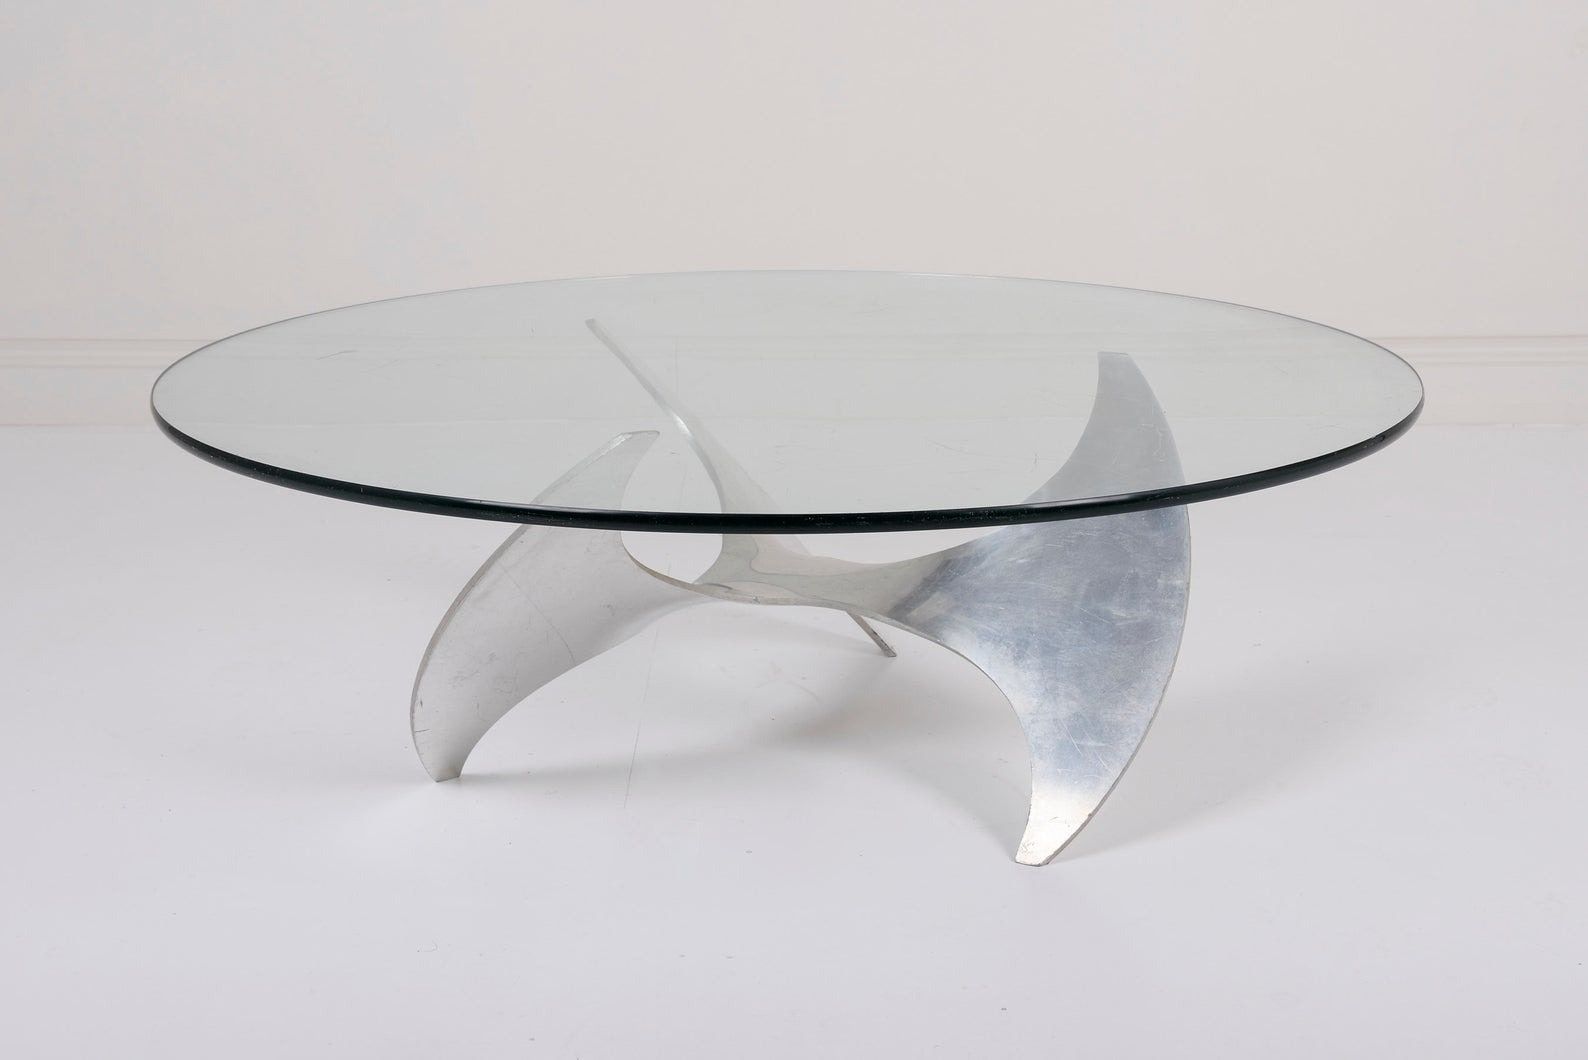 The Best Glass Coffee Table For Your Style: 31 Options For Any And Every  Living Room | Architectural Digest Regarding Glass Topped Coffee Tables (View 12 of 20)